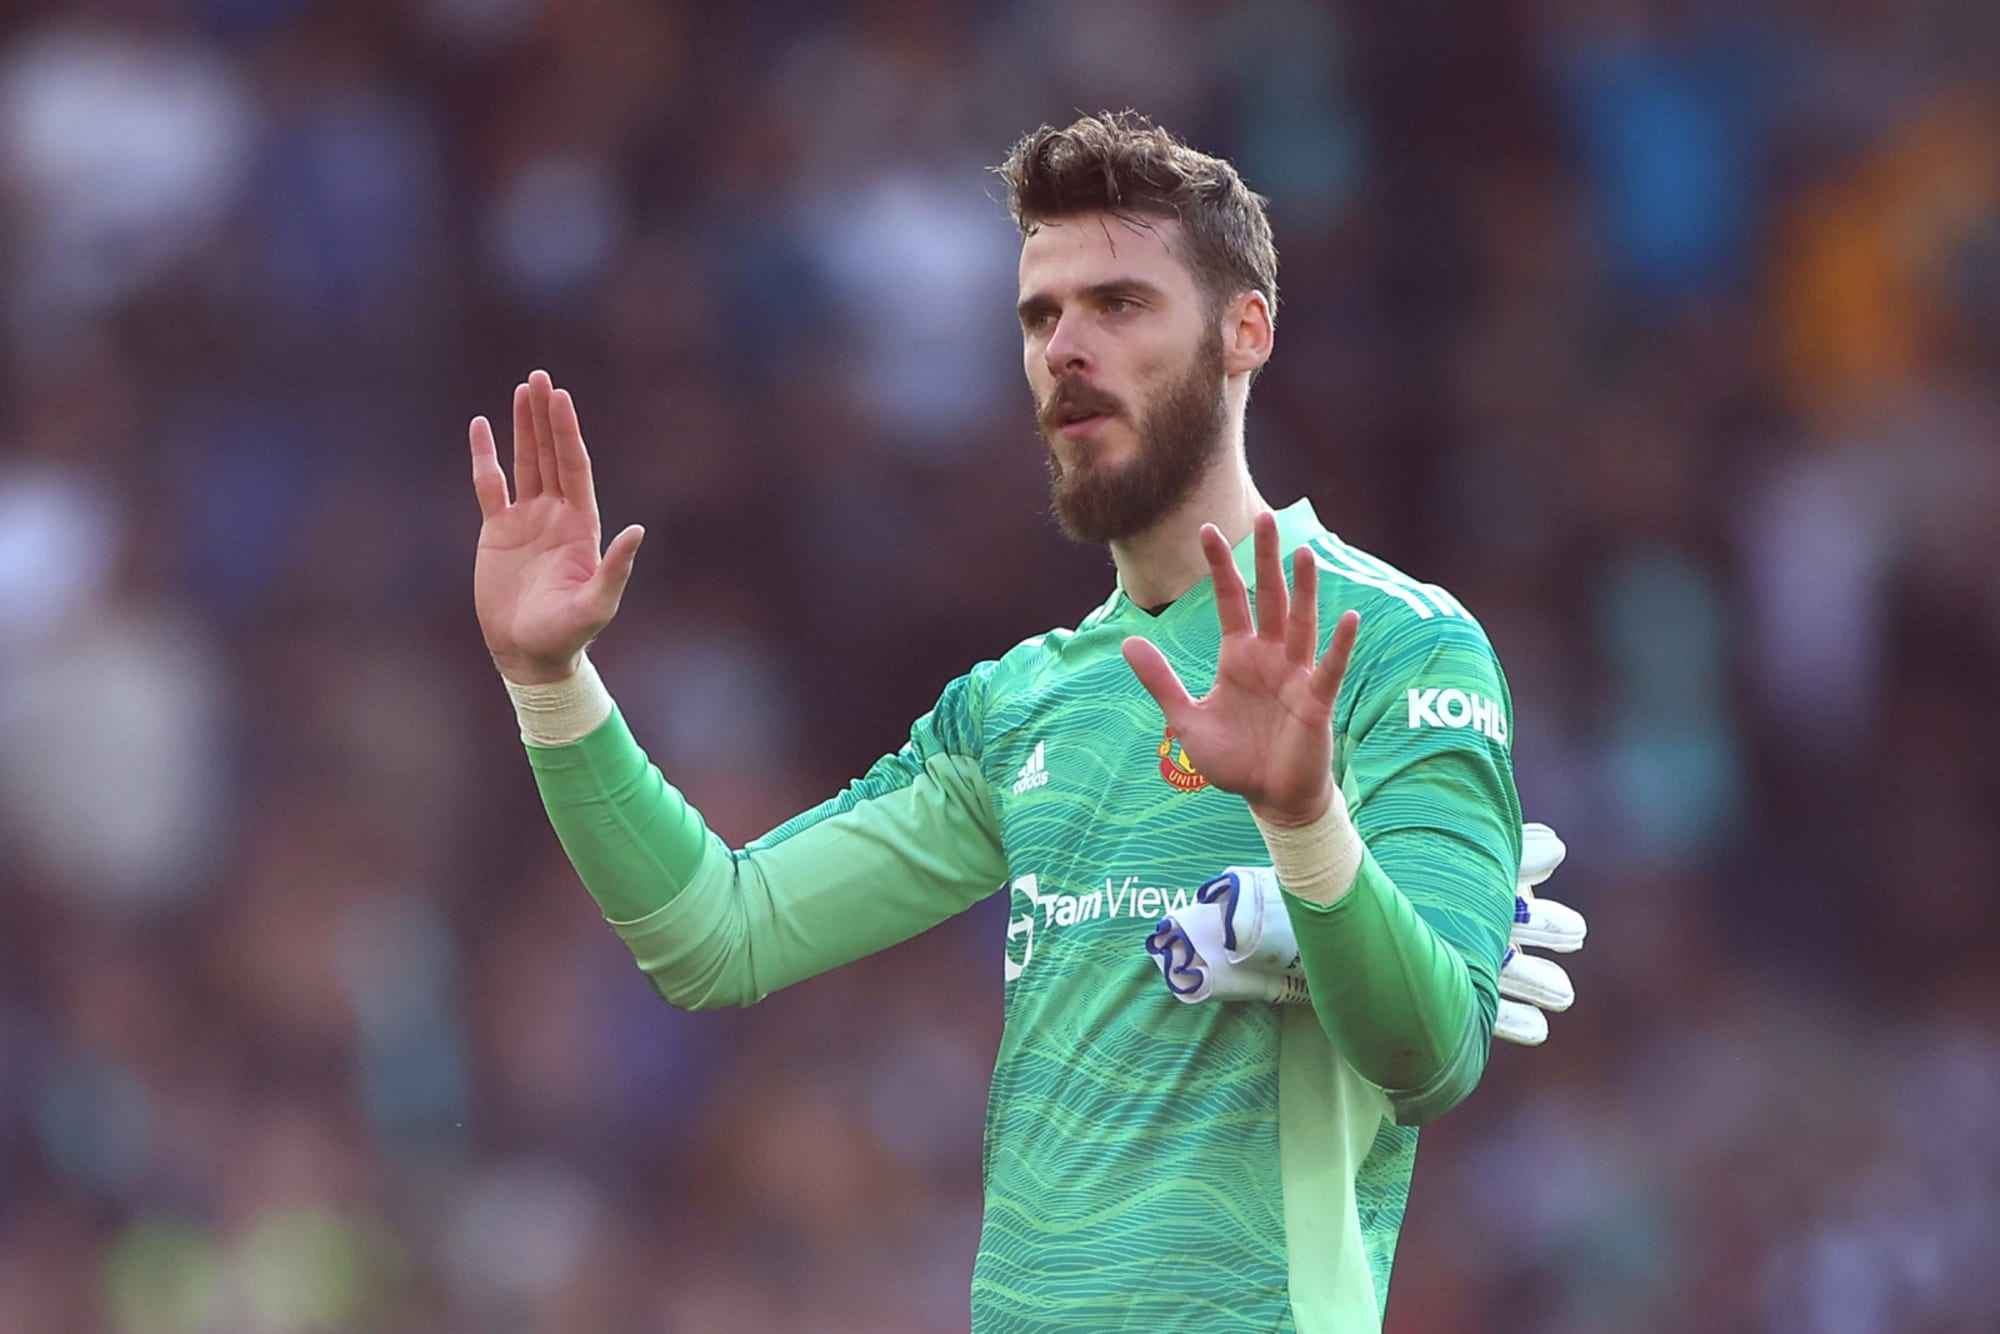 Top 3 options for Manchester United to replace David de Gea